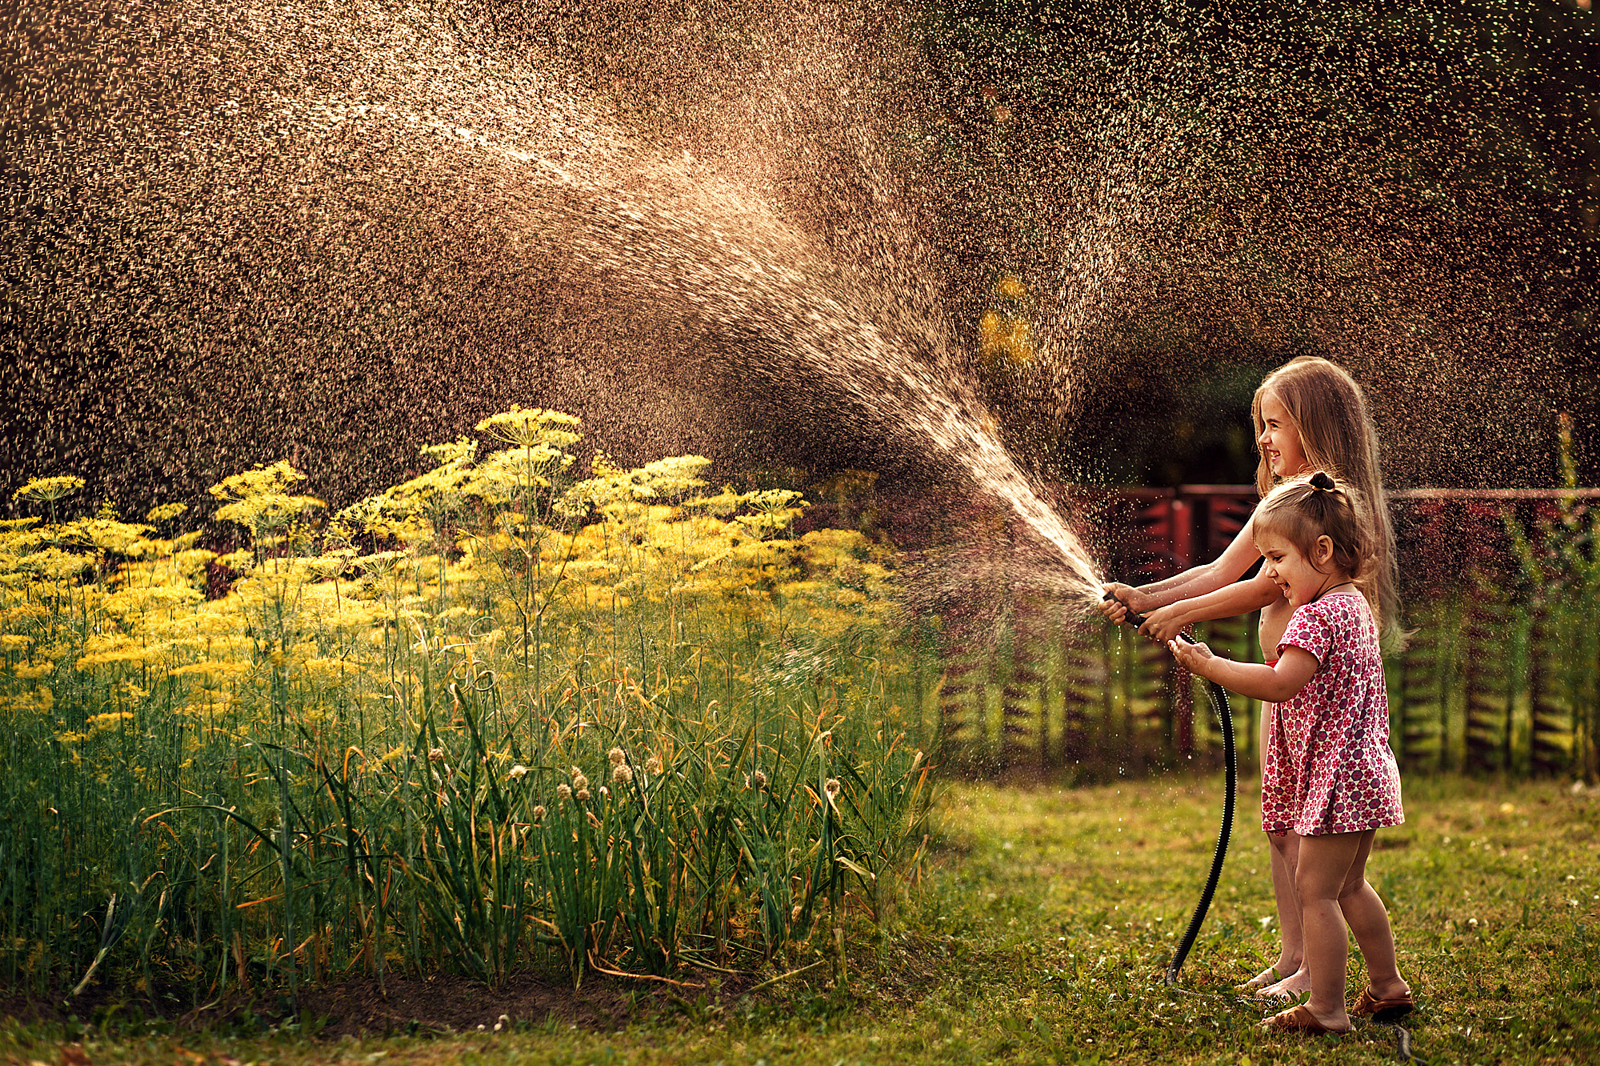 Mom Photographer Captures the Simple Joys of Childhood